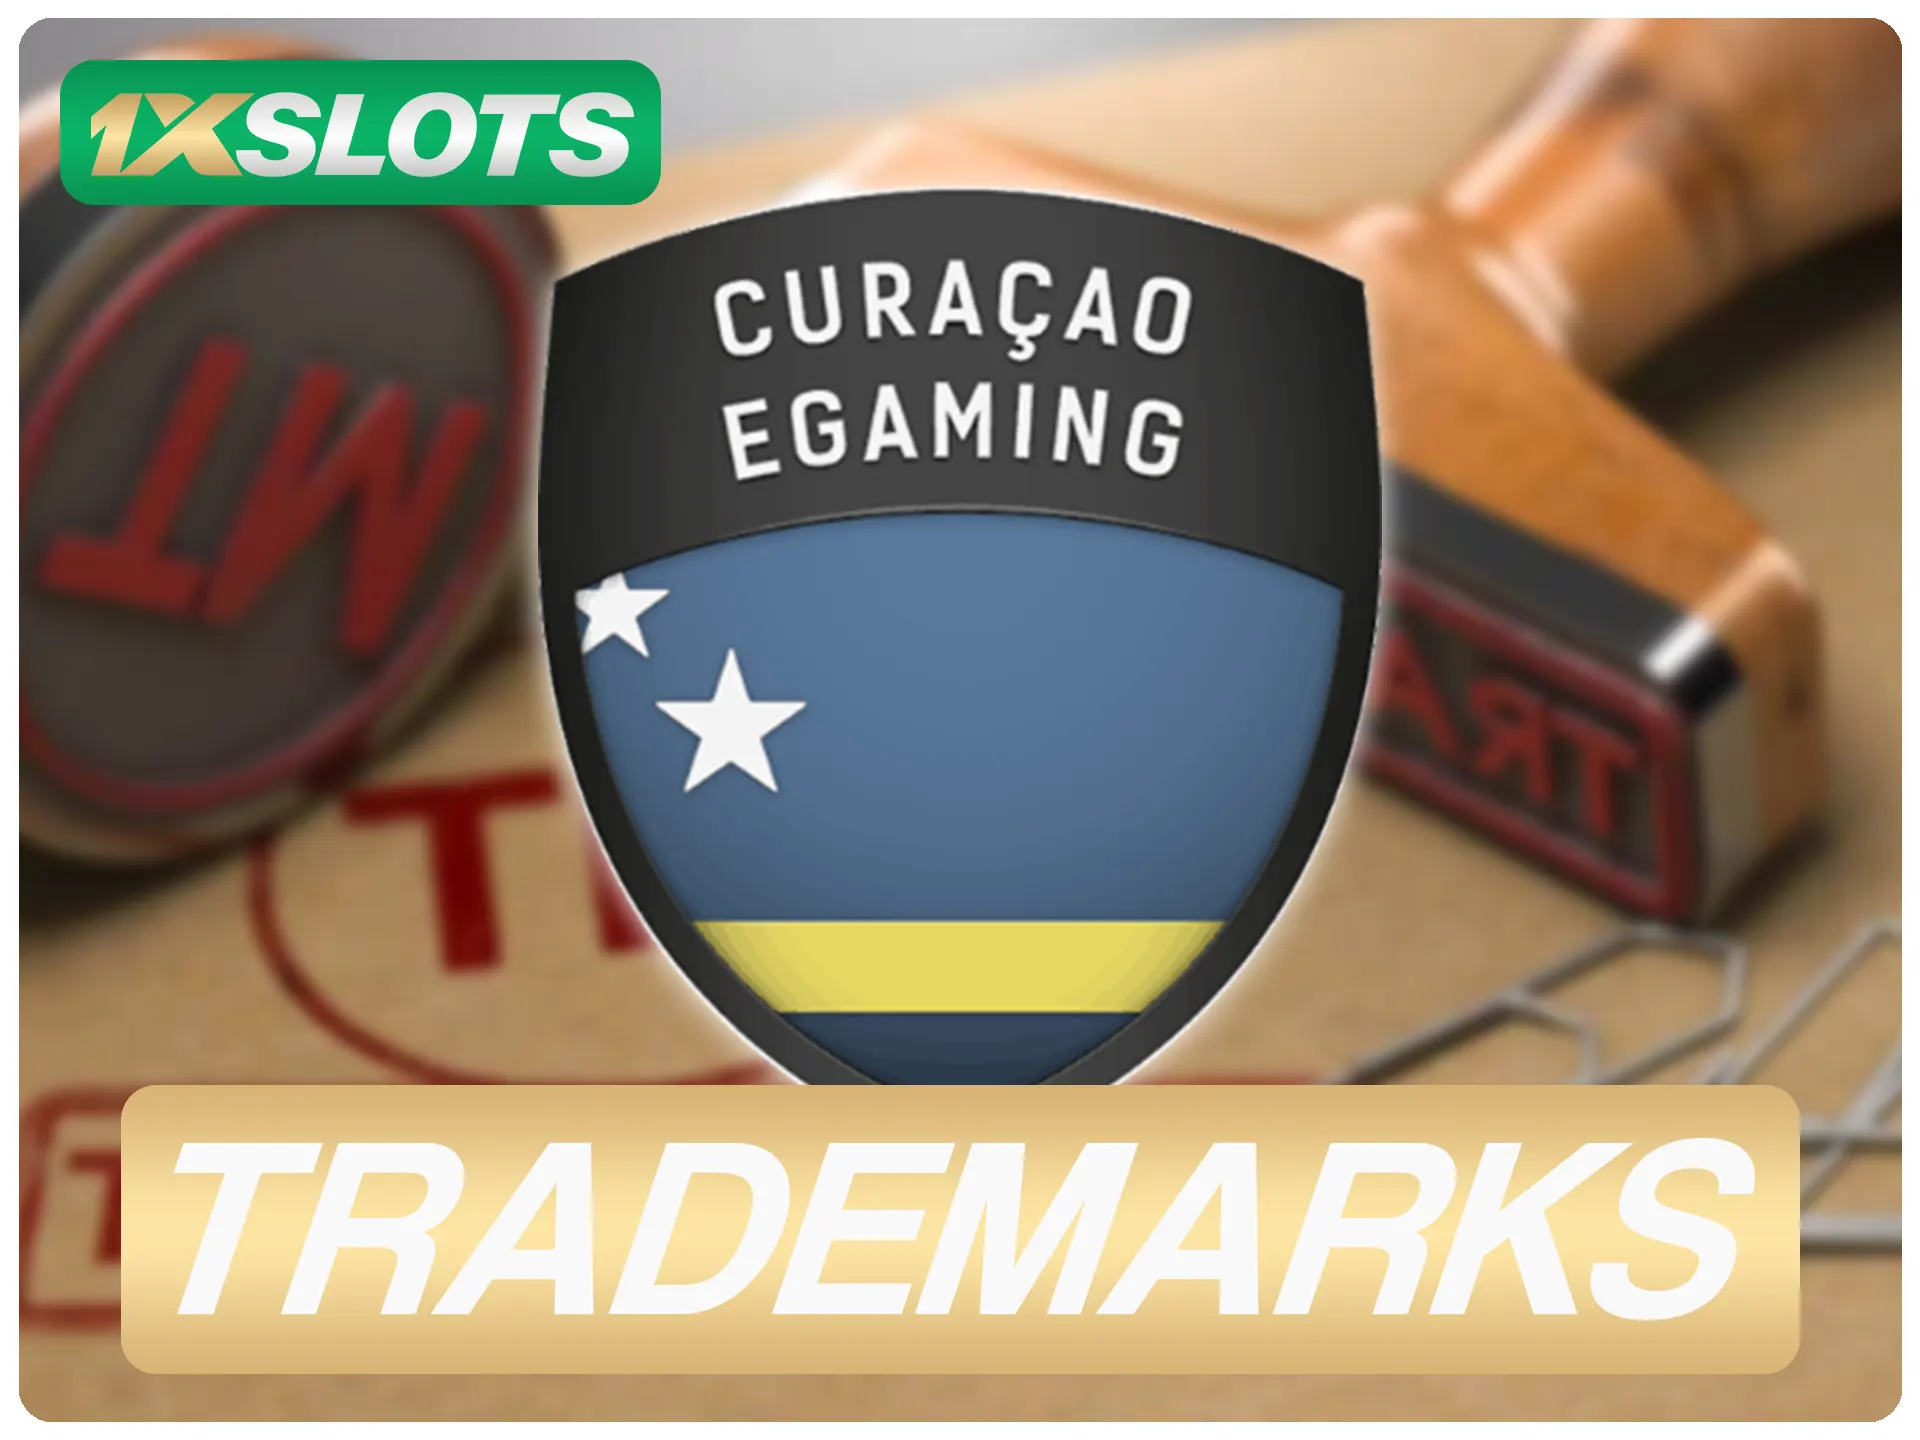 1xSlots owns all of the trademarks.